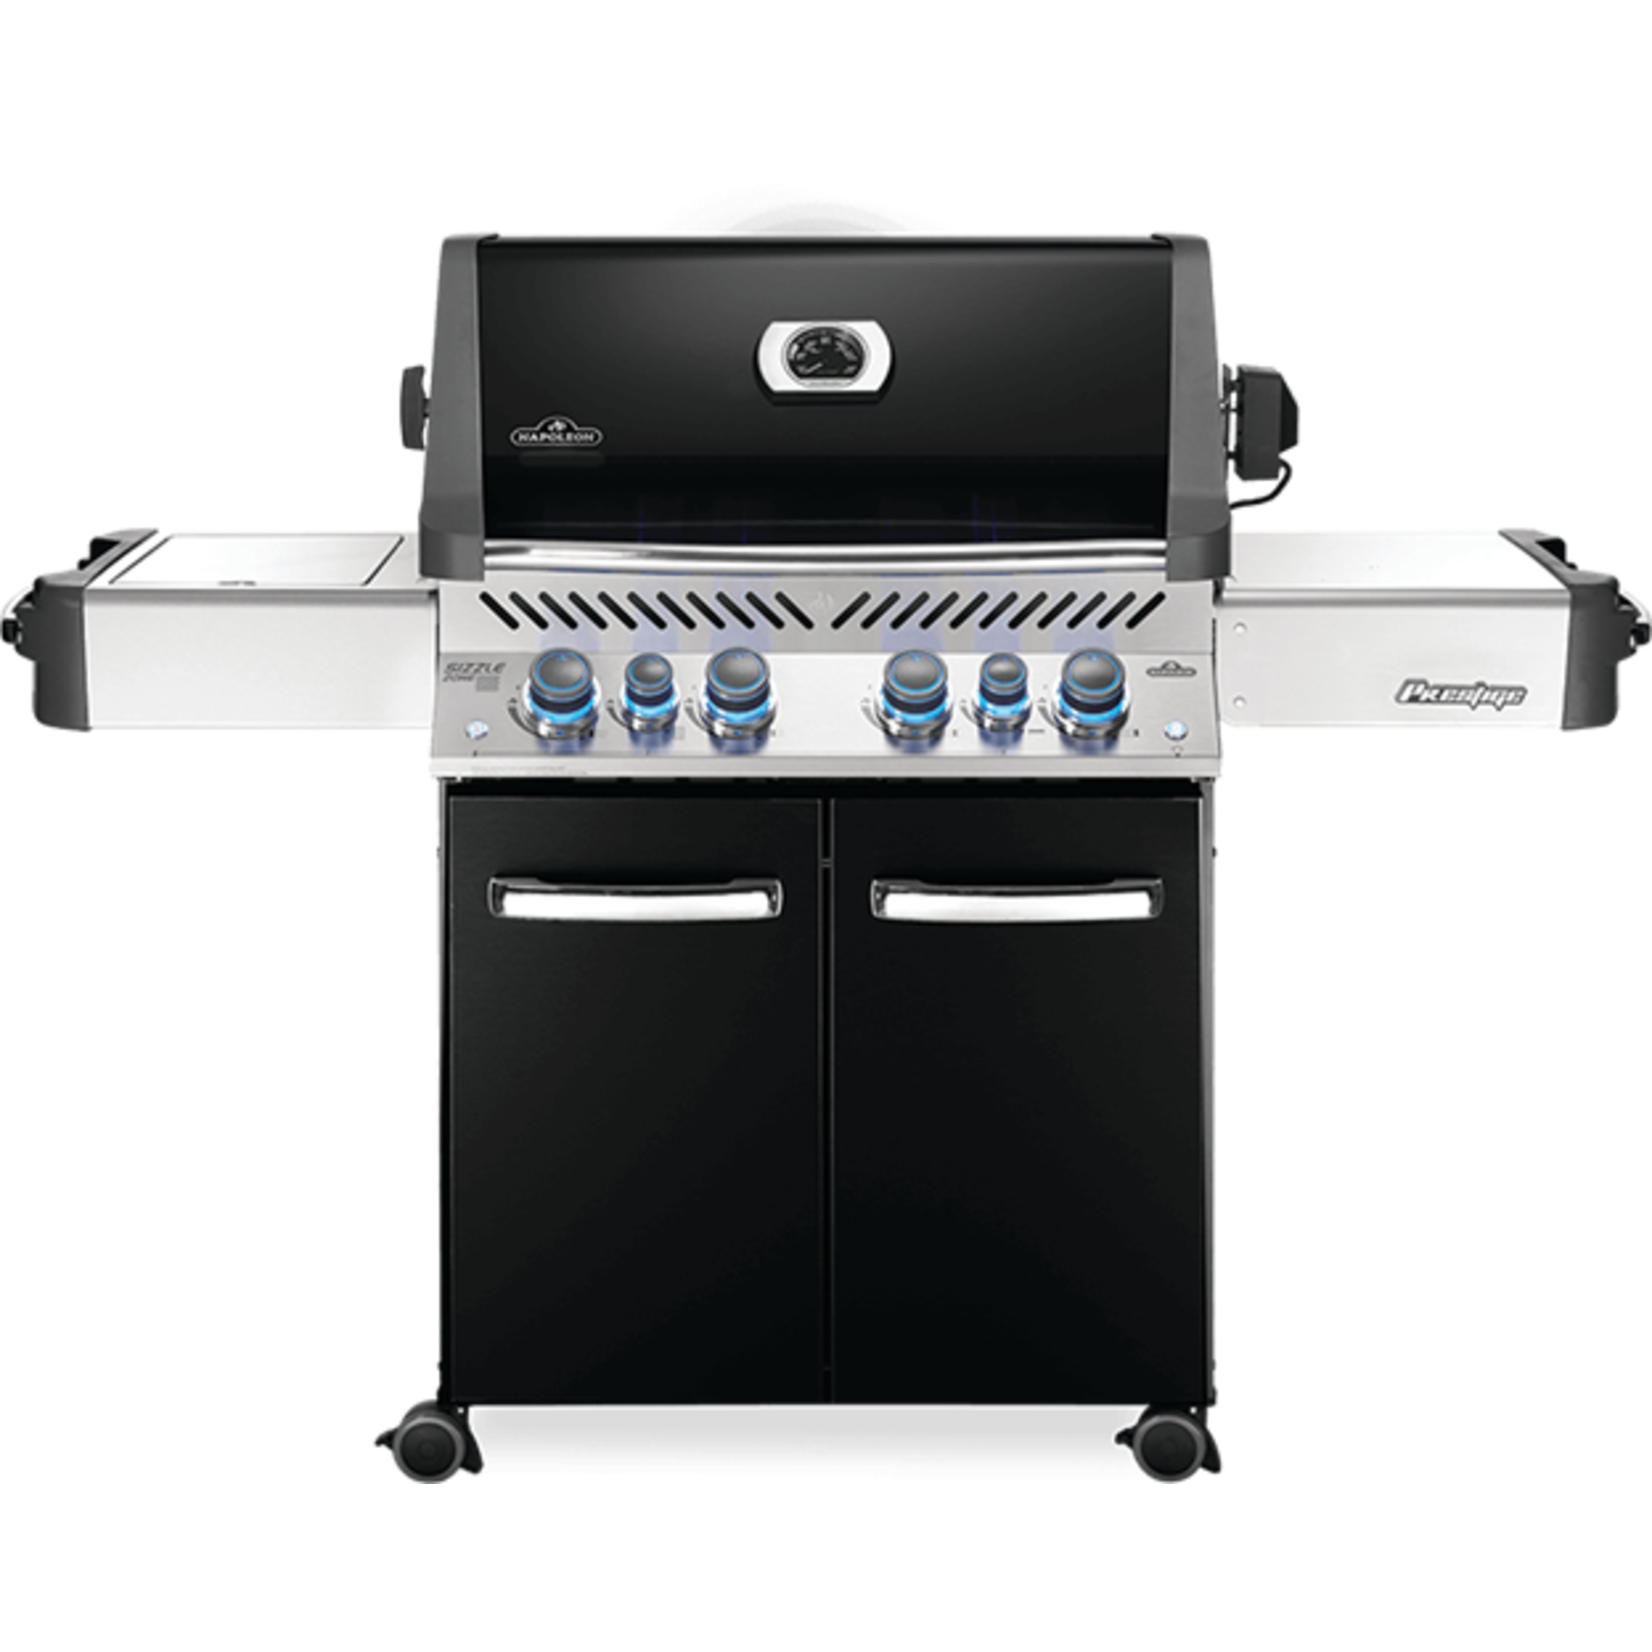 Napoleon Prestige® 500 Natural Gas Grill with Infrared Side and Rear Burners, Black ($125 Instant Rebate)